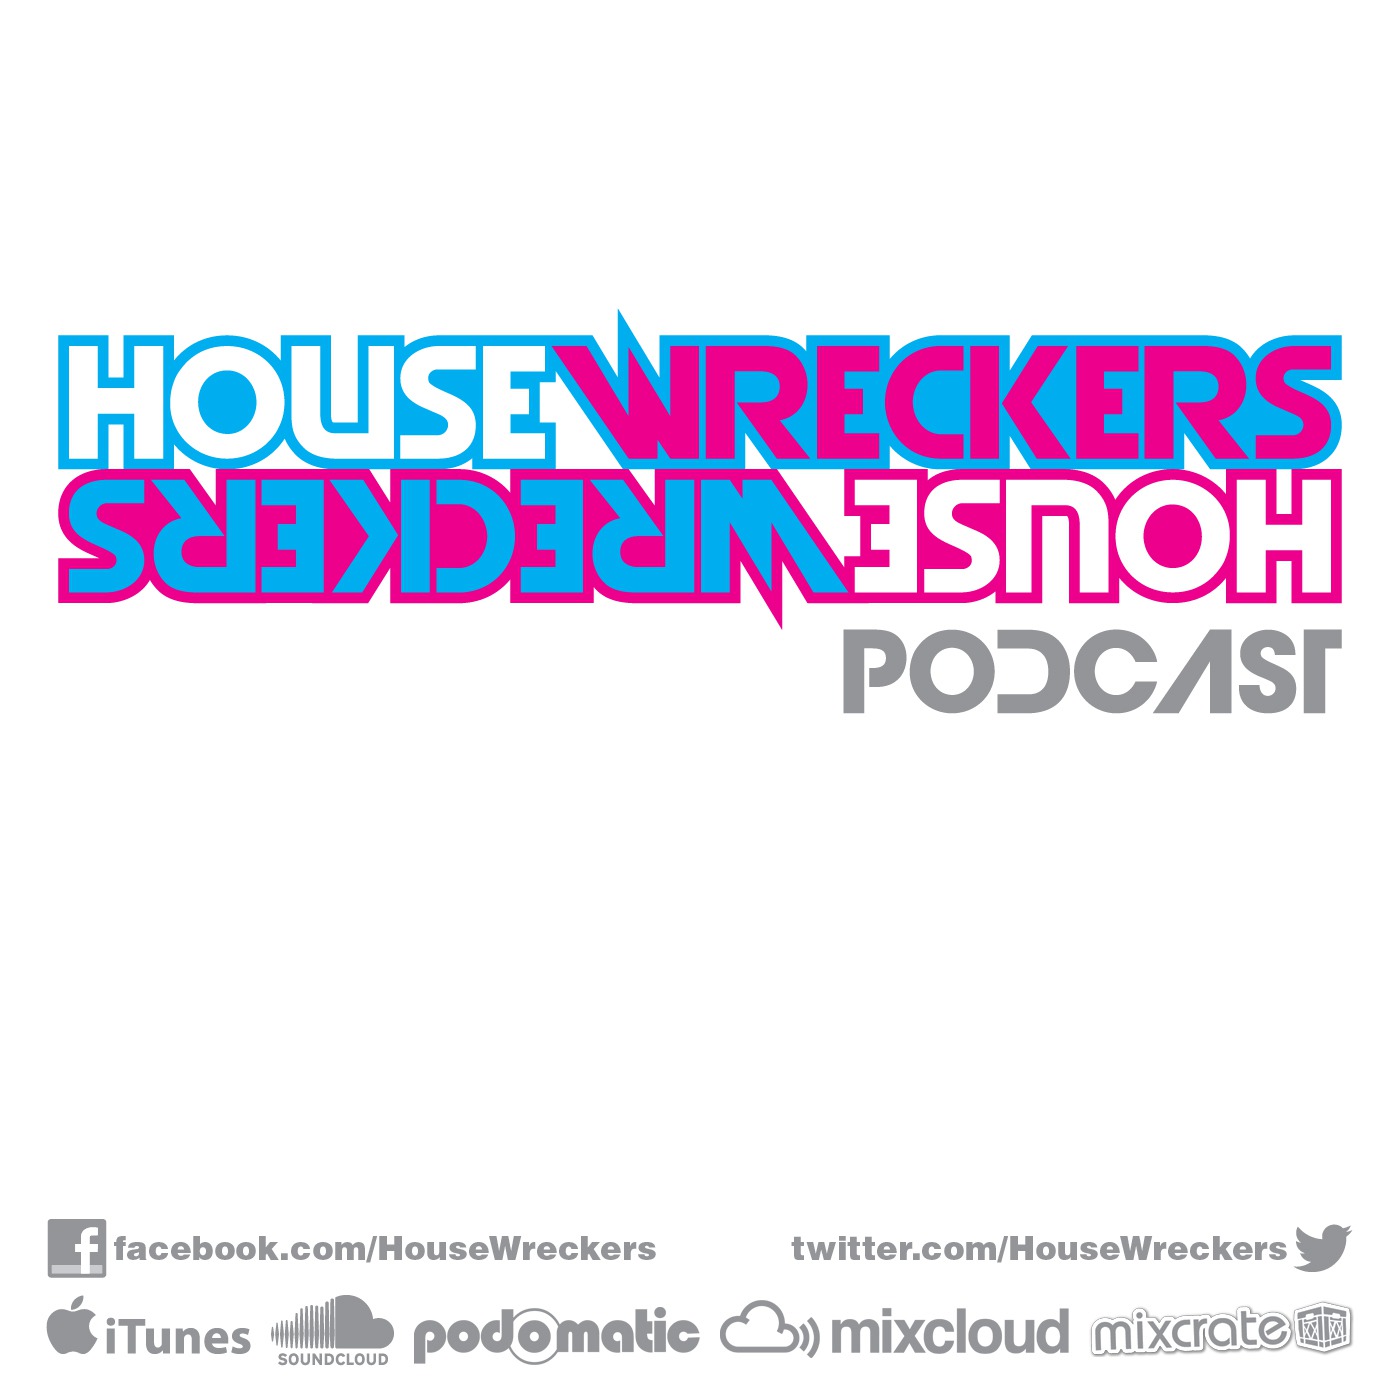 HouseWreckers Podcast